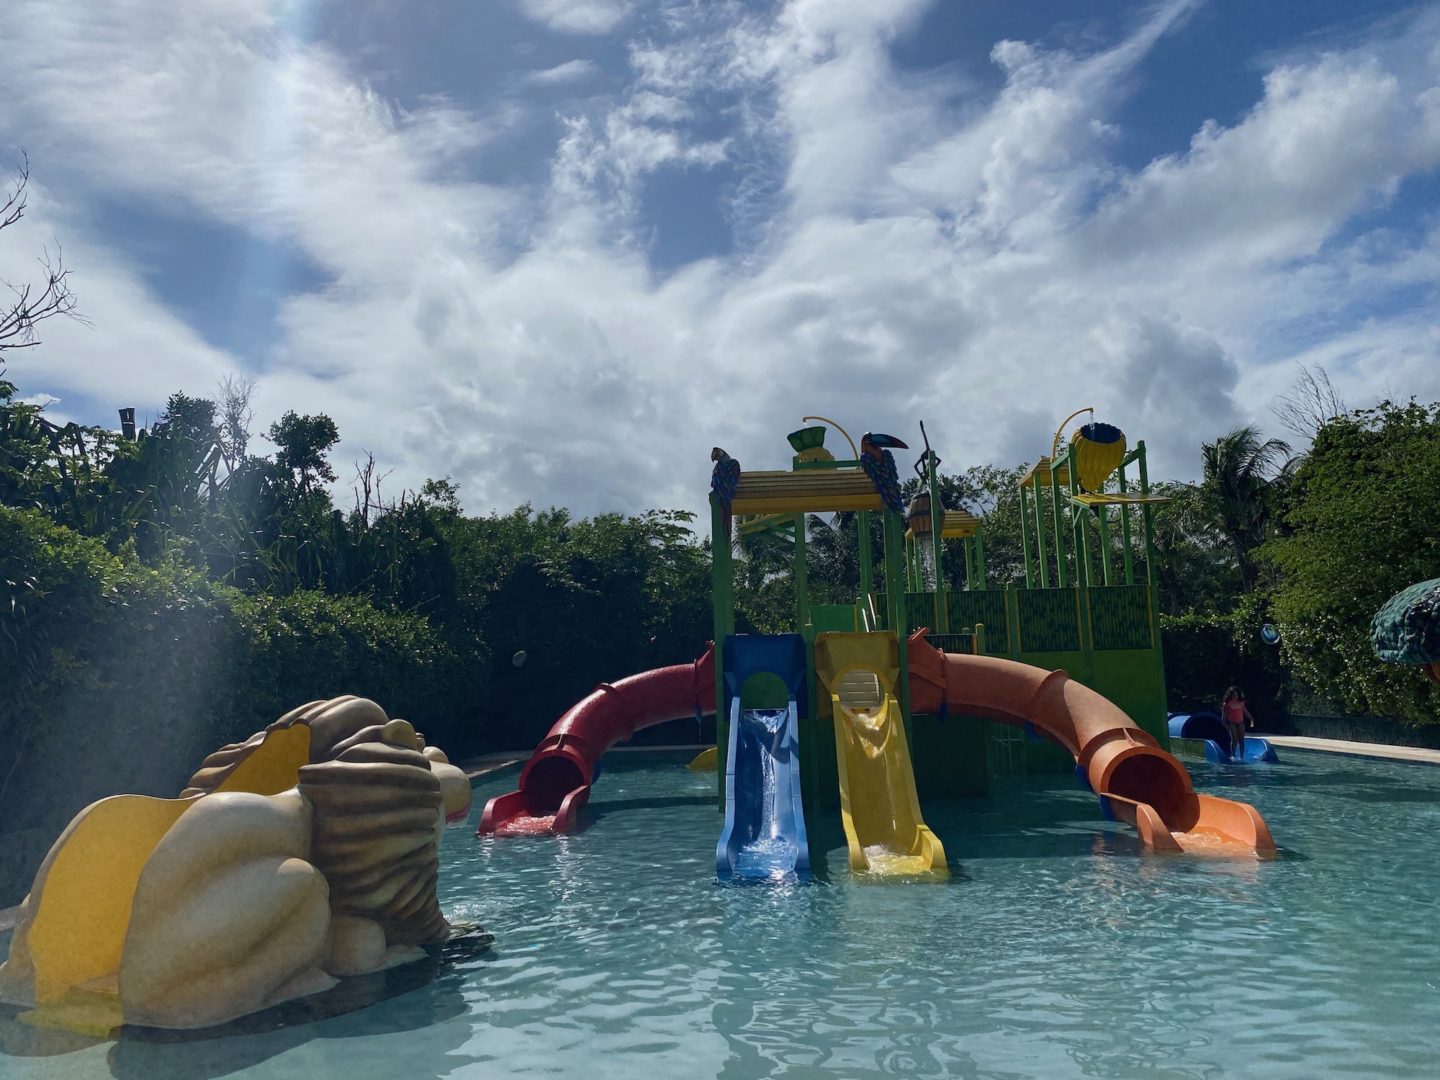 Children's Water Park, Explorer's Club for Kids, at Dreams Tulum Resort and Spa, Tulum, Mexico